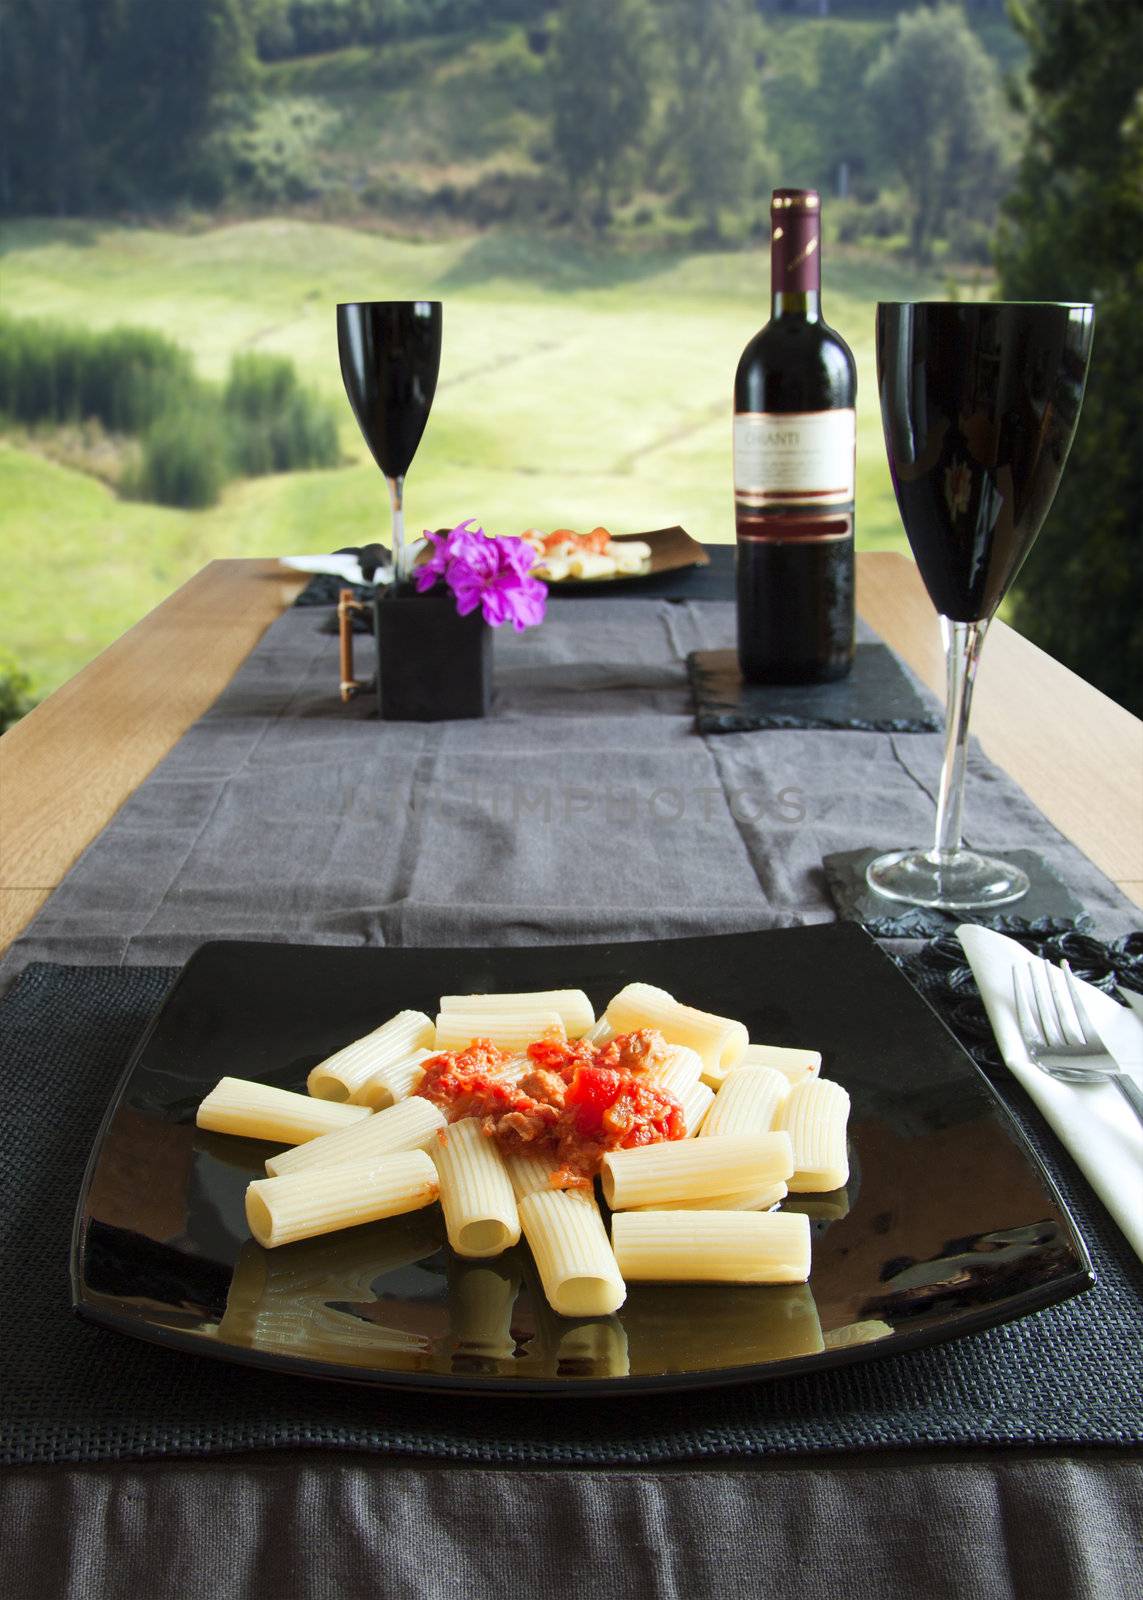 Table spread with Italian maccheroni over black plate, with green environment on the background